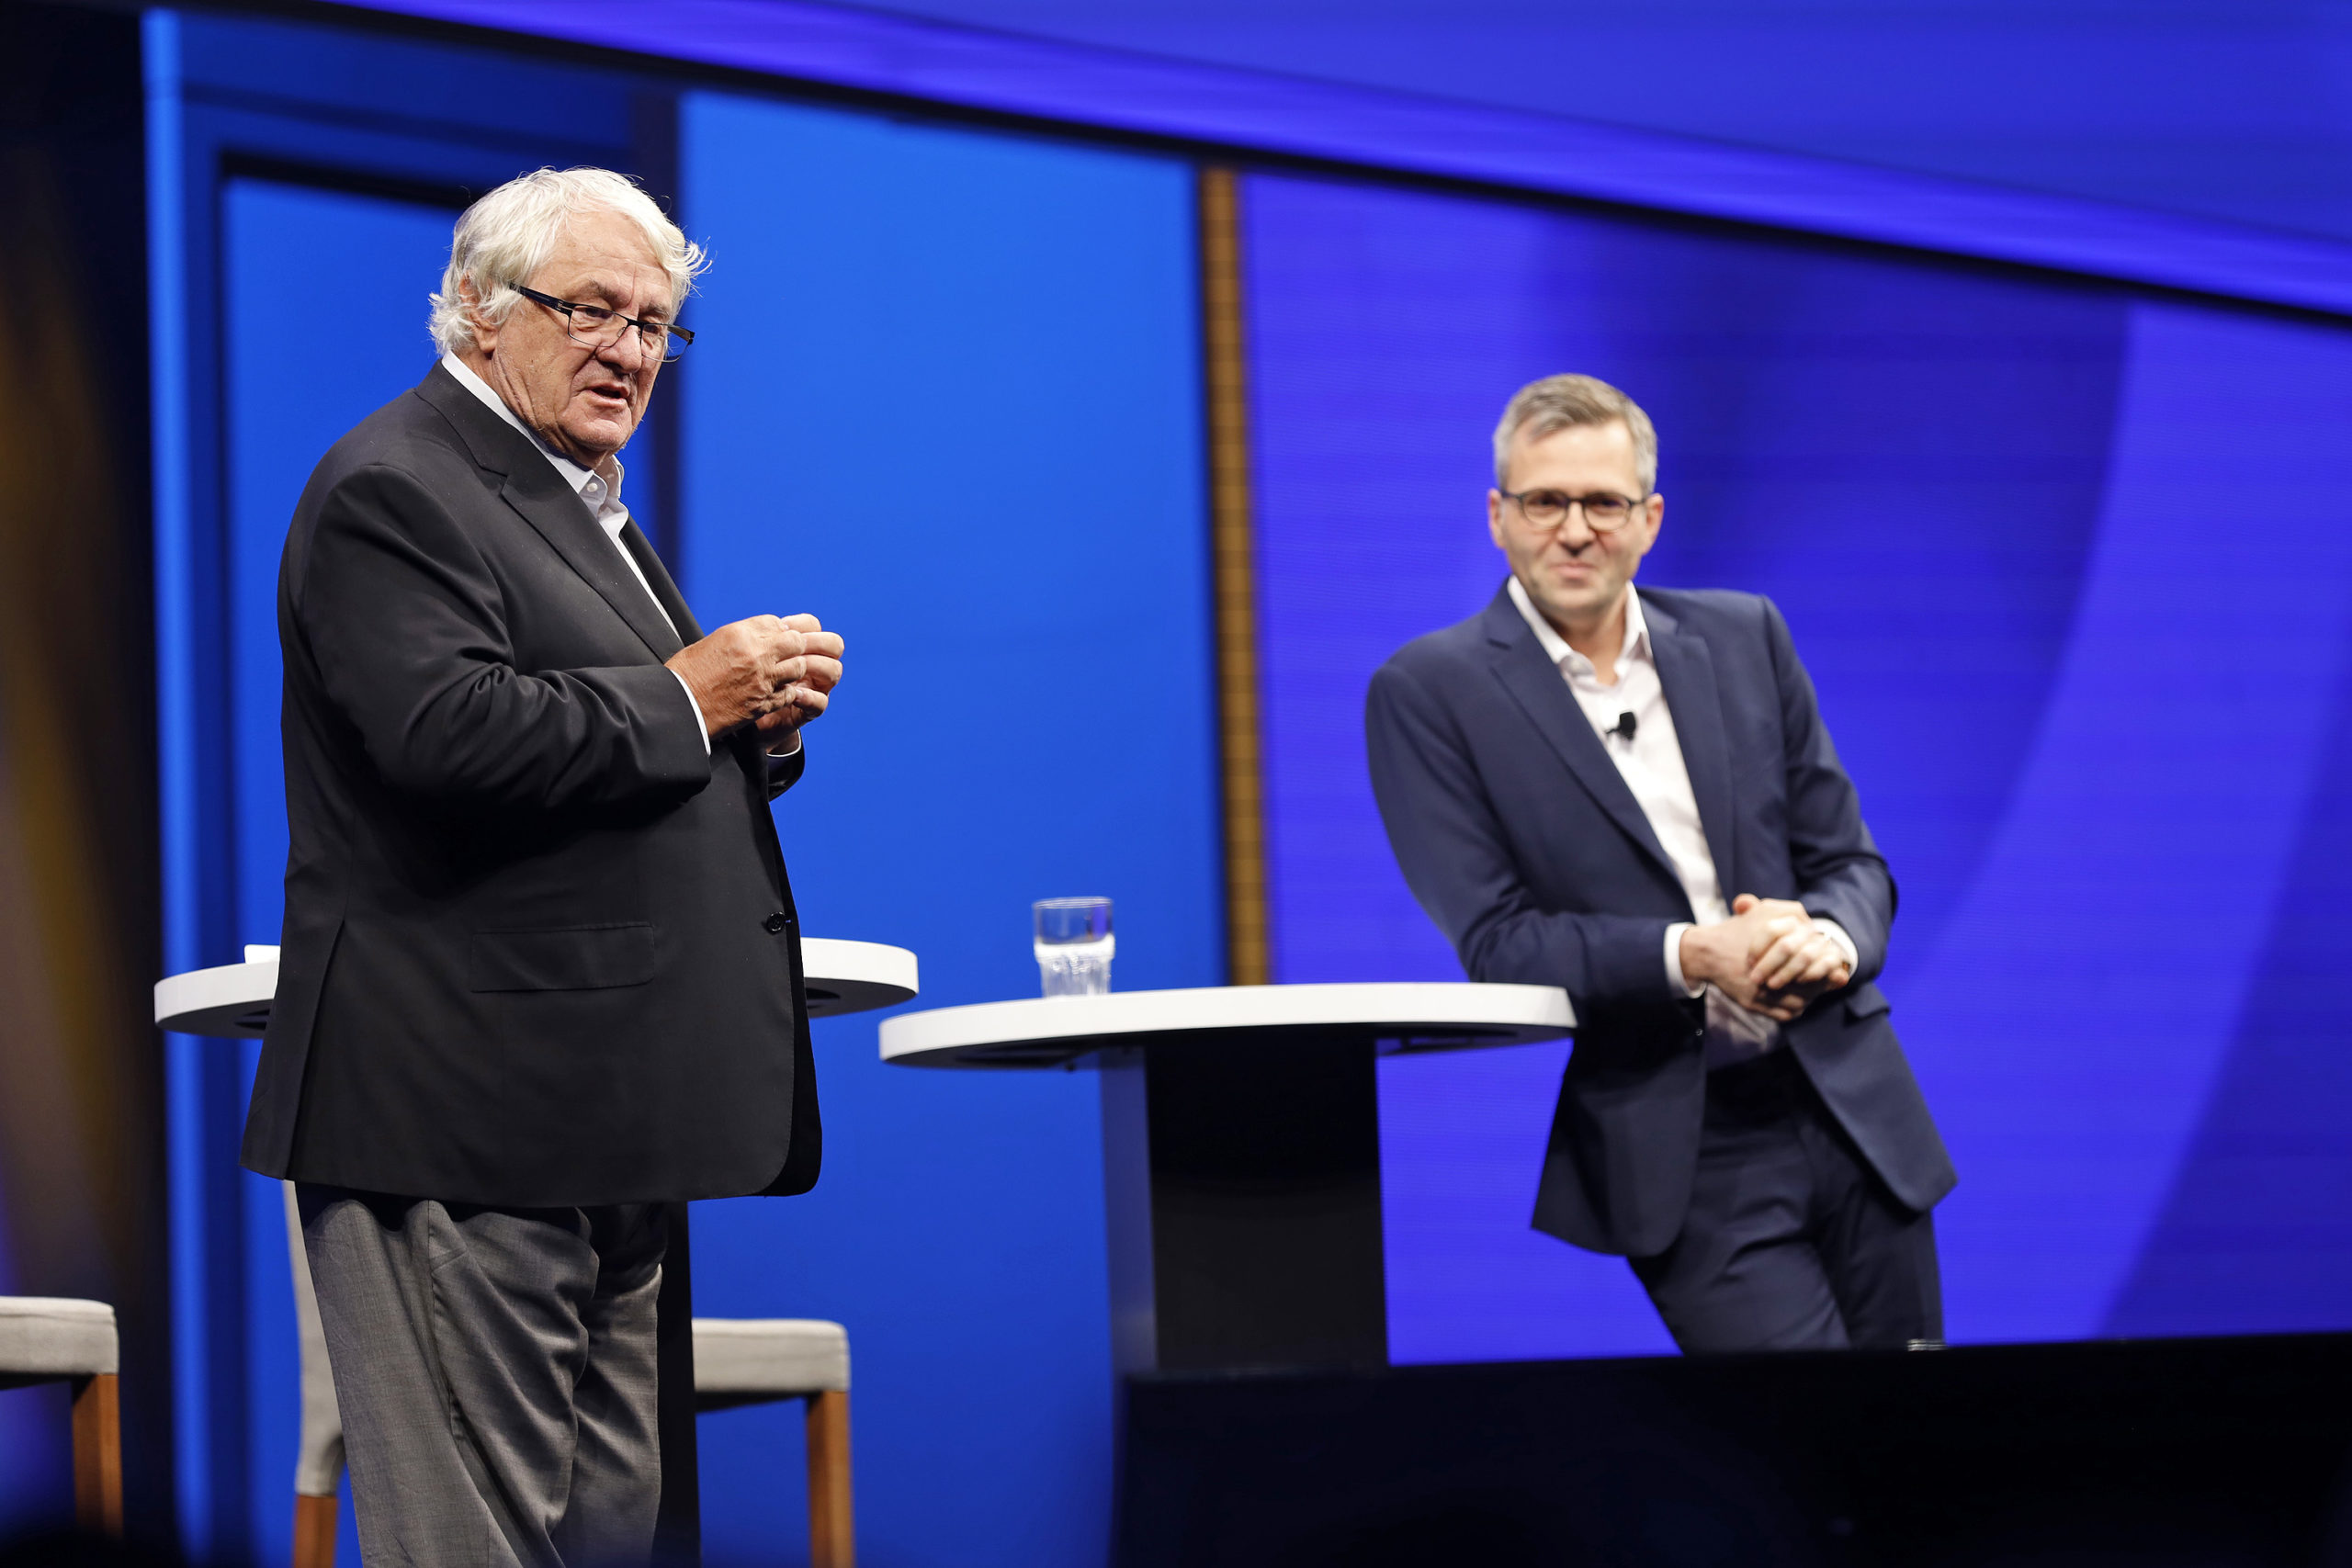 SAP founder Hasso Plattner and Qualtrics co-founder Jared Smith at Sapphire Now 2019